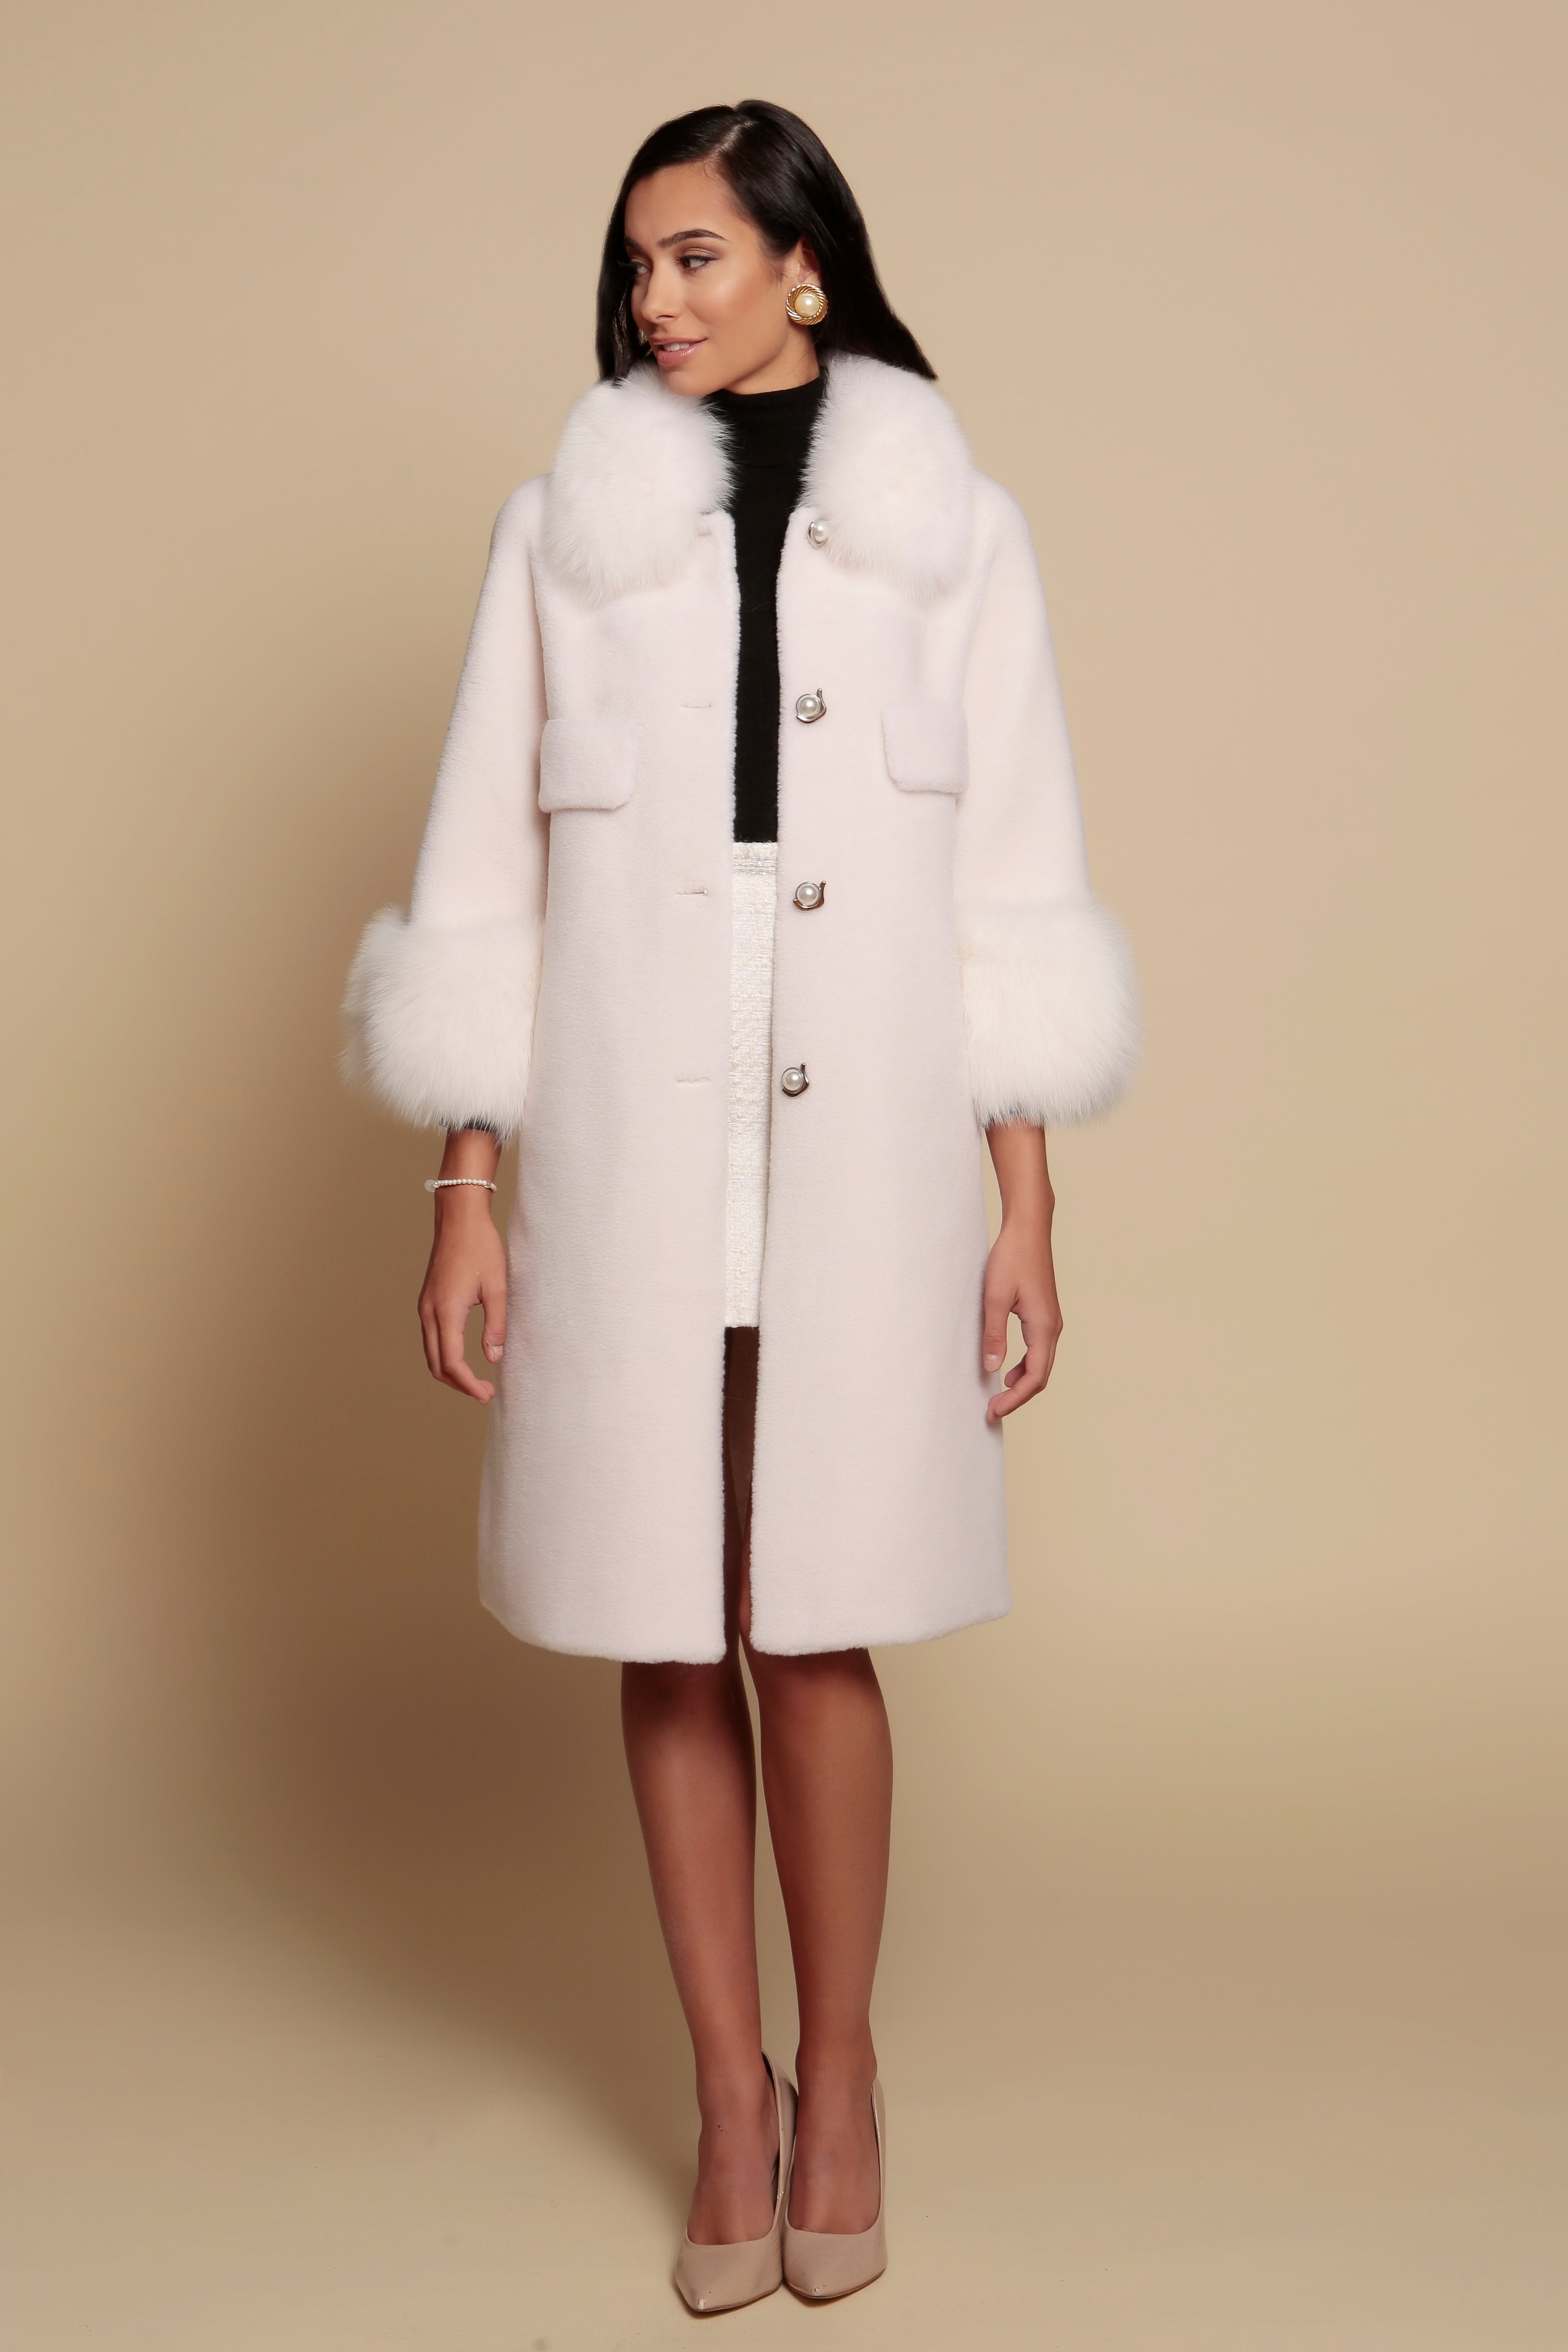 'Hayworth' Wool and Faux Fur Coat in Bianco